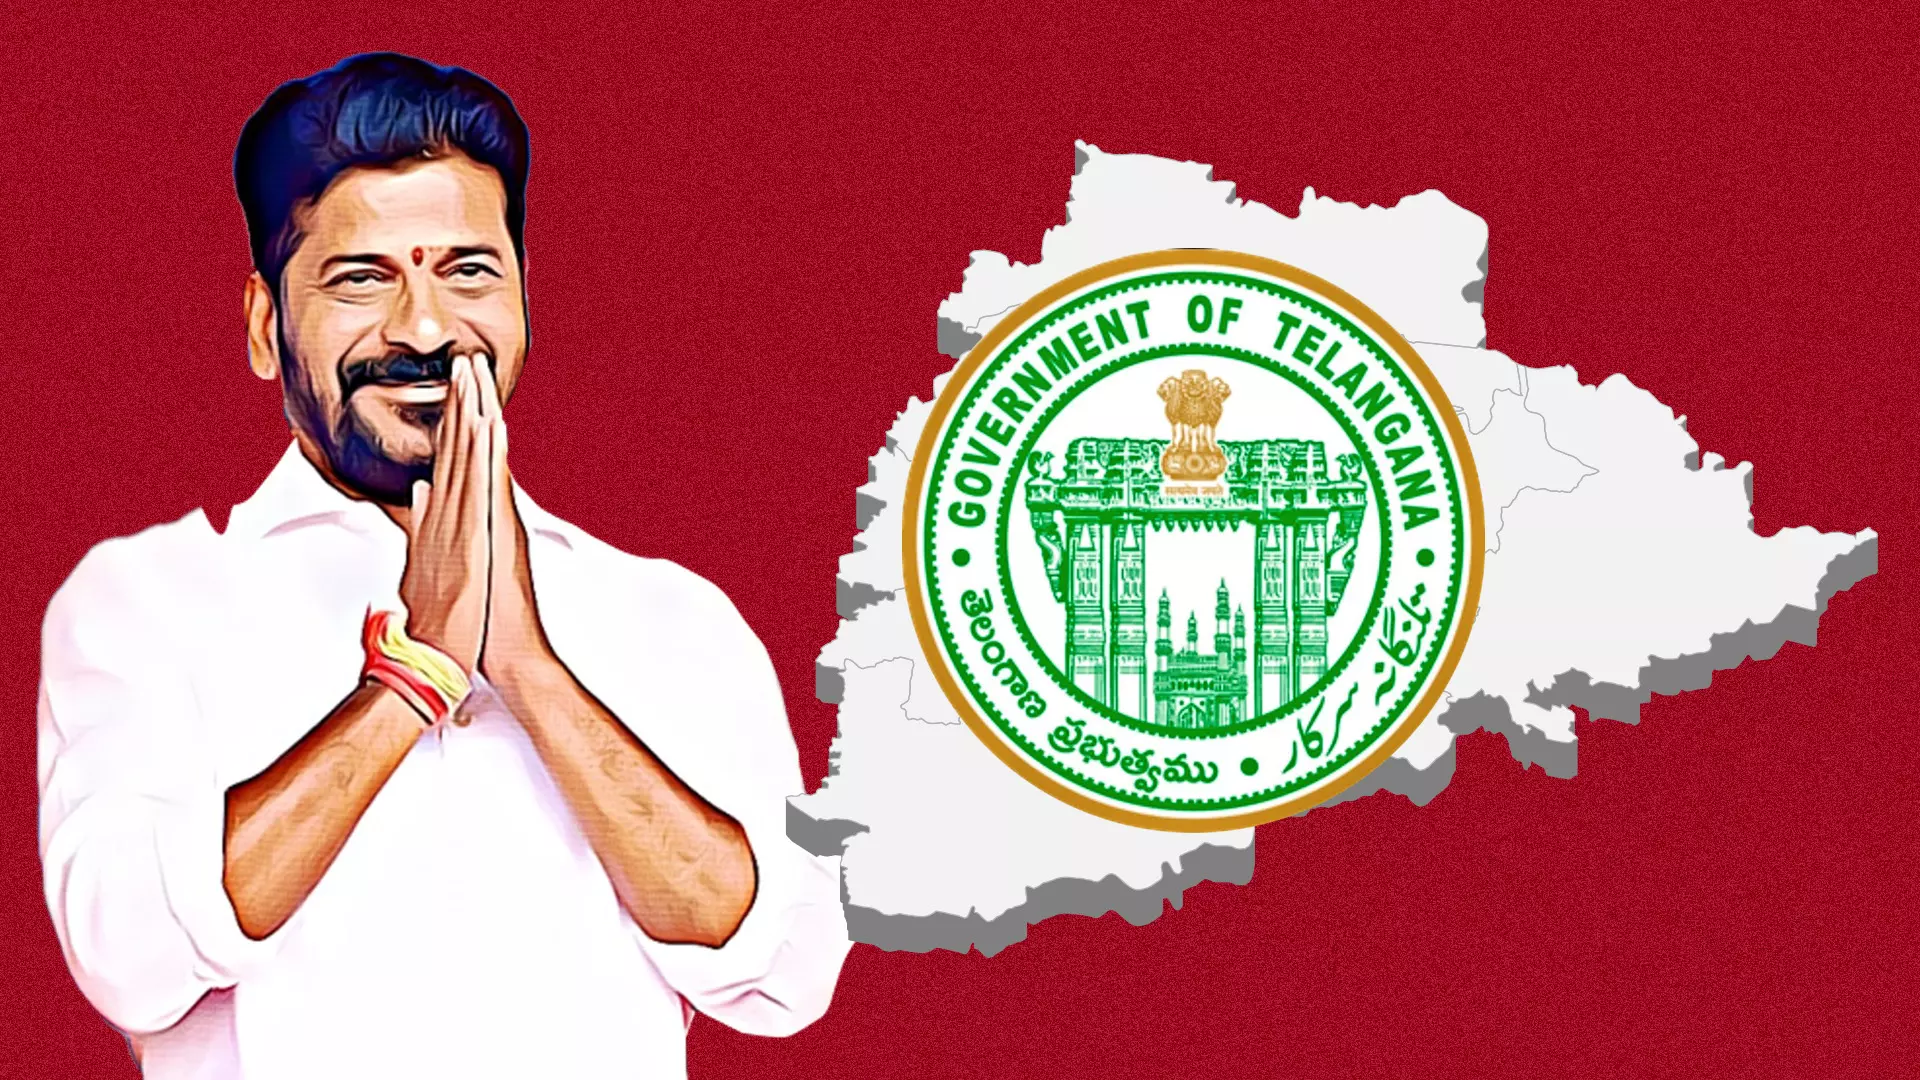 Telangana | Revanth in trouble after trying to tinker with state emblem